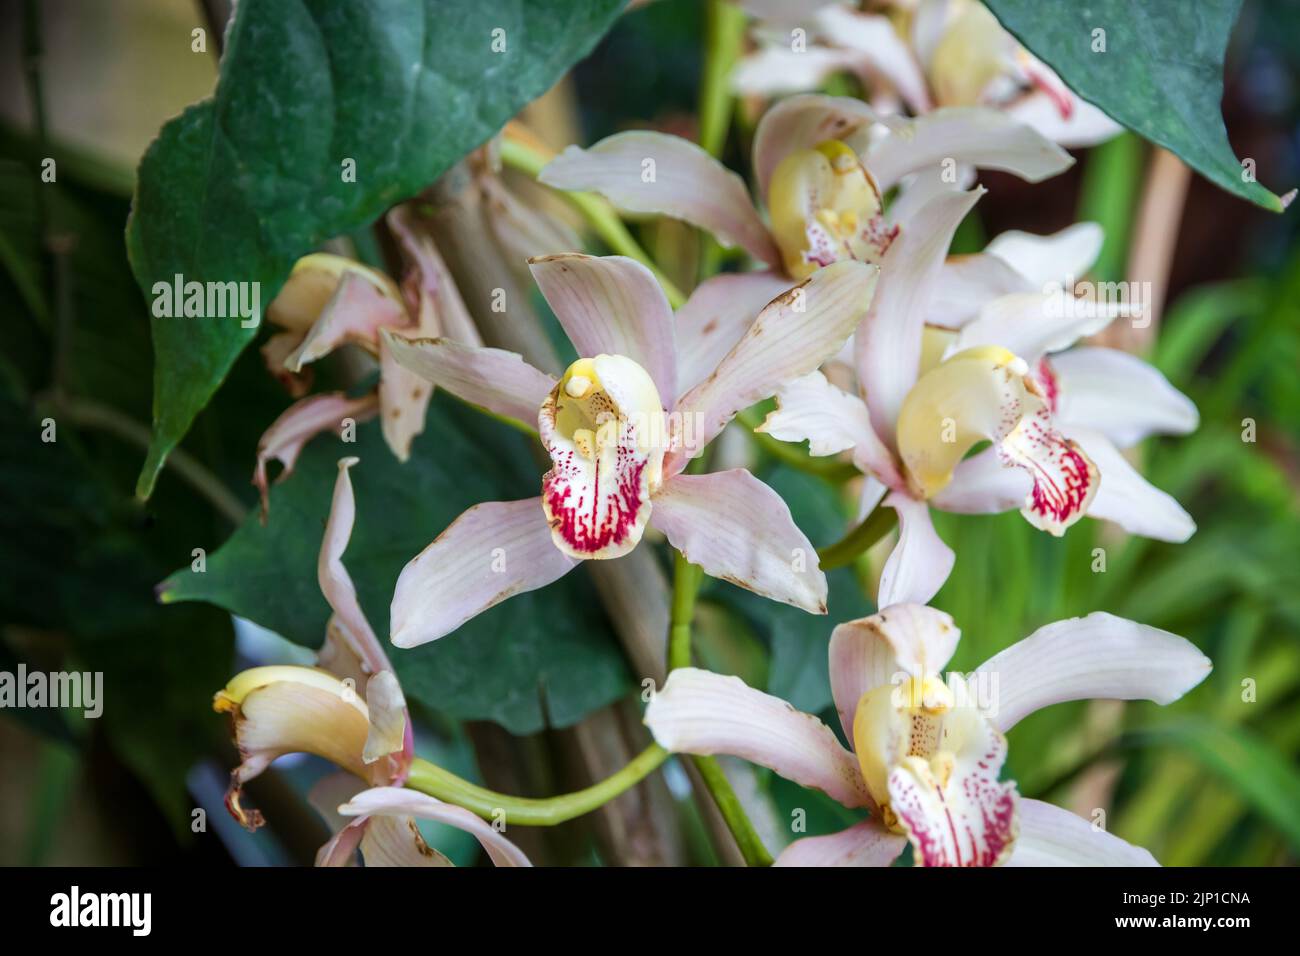 Orchid flower, white cymbidium. Tropical floral background Stock Photo